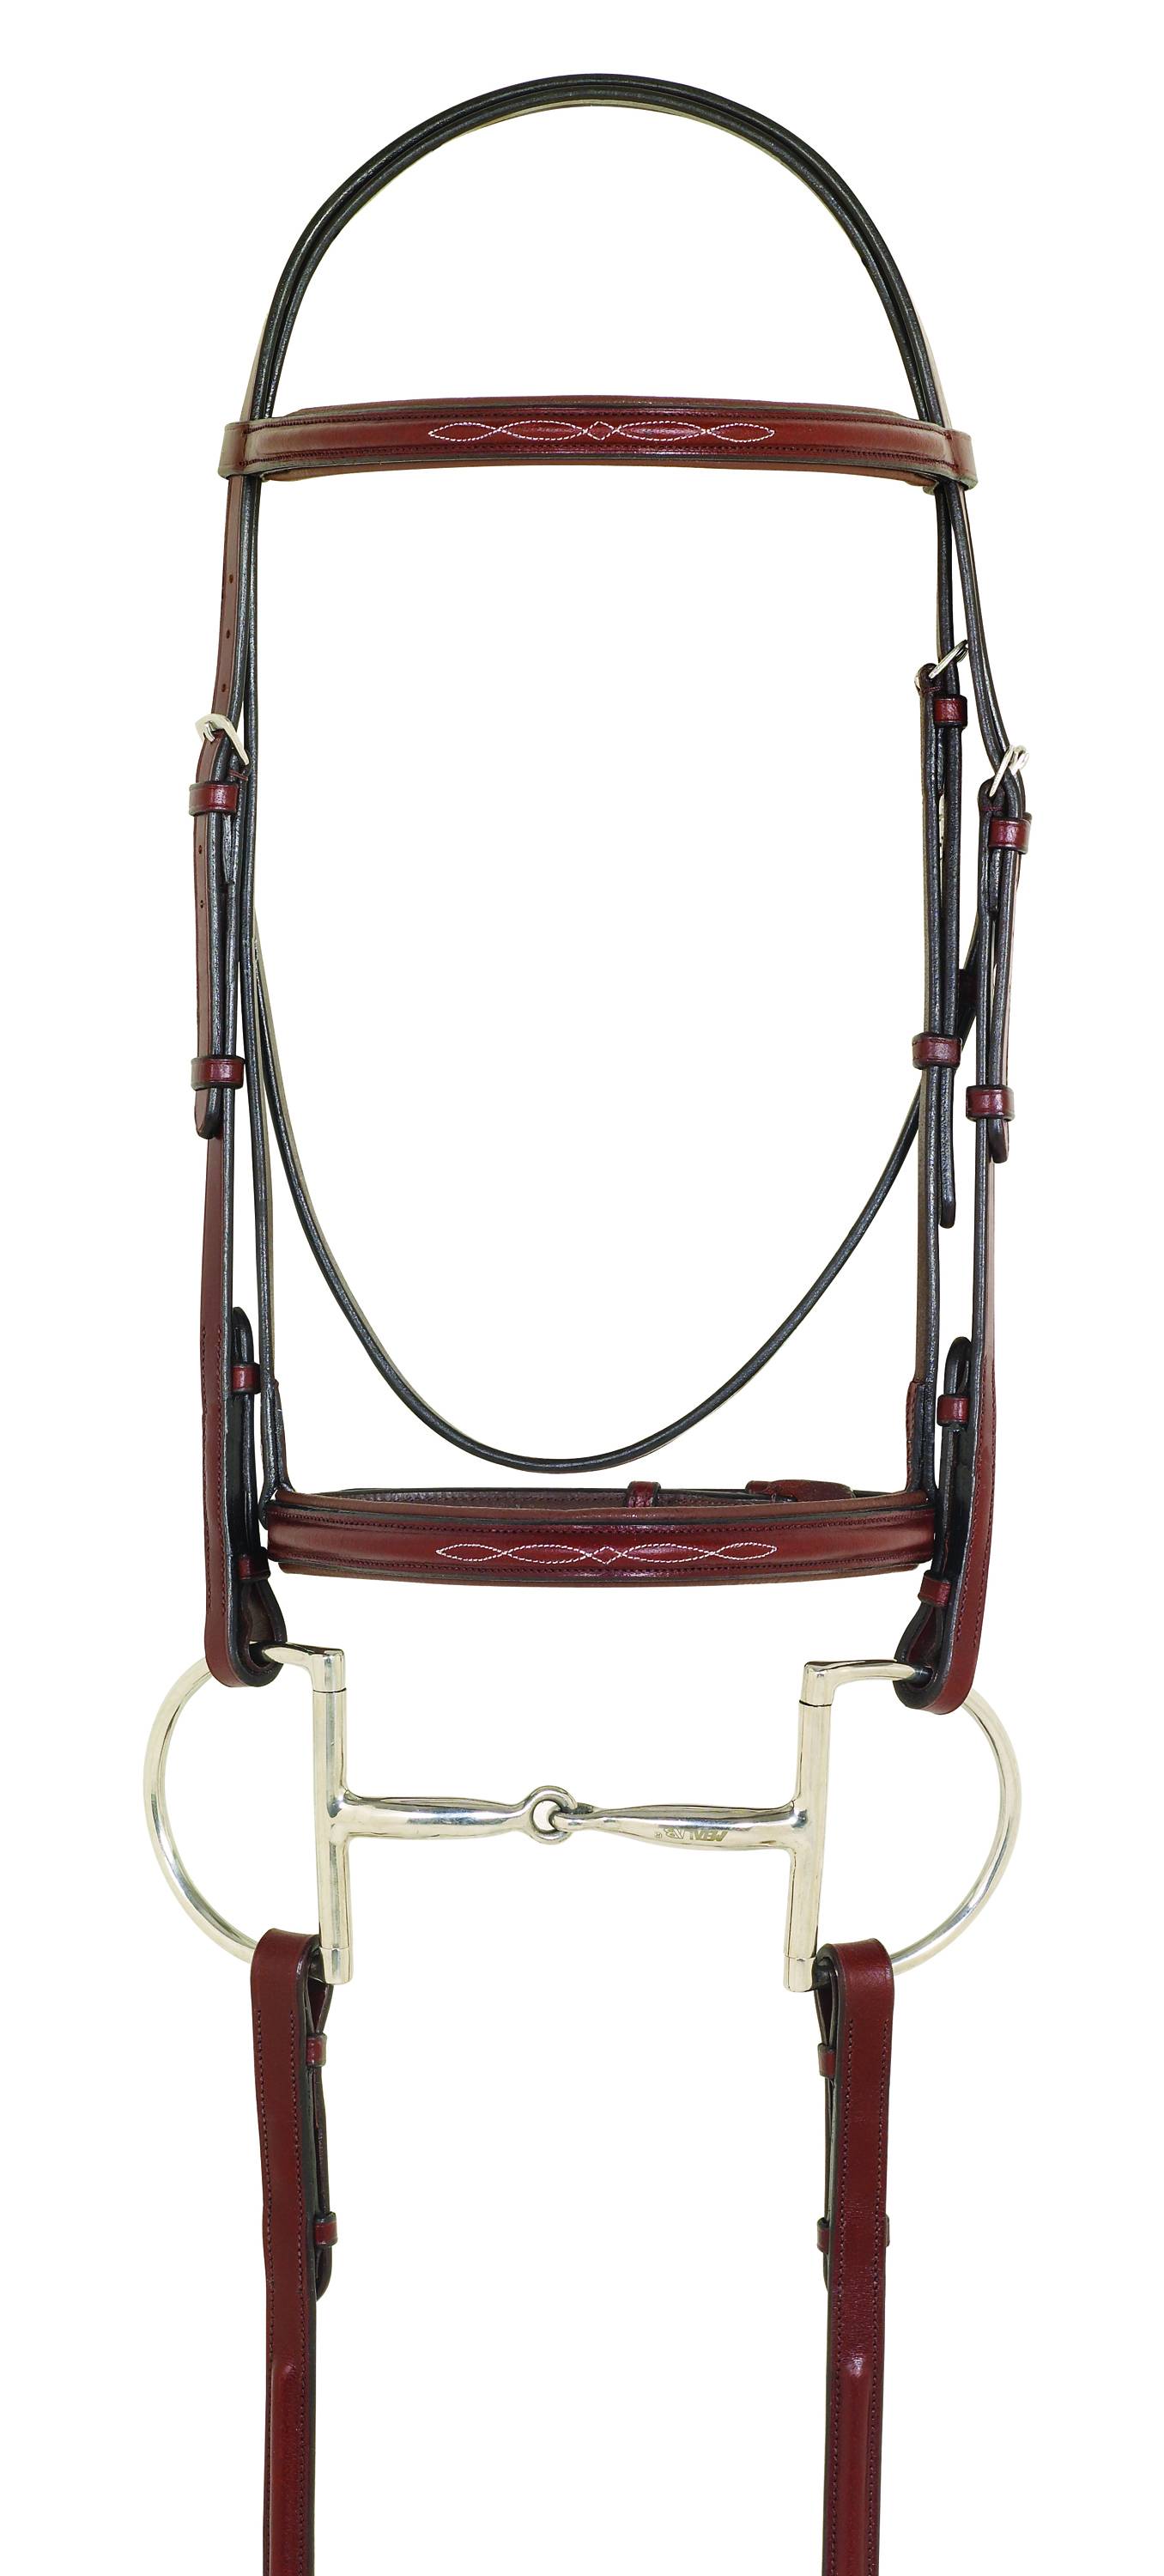 Camelot Fancy Stitched Raised Padded Bridle